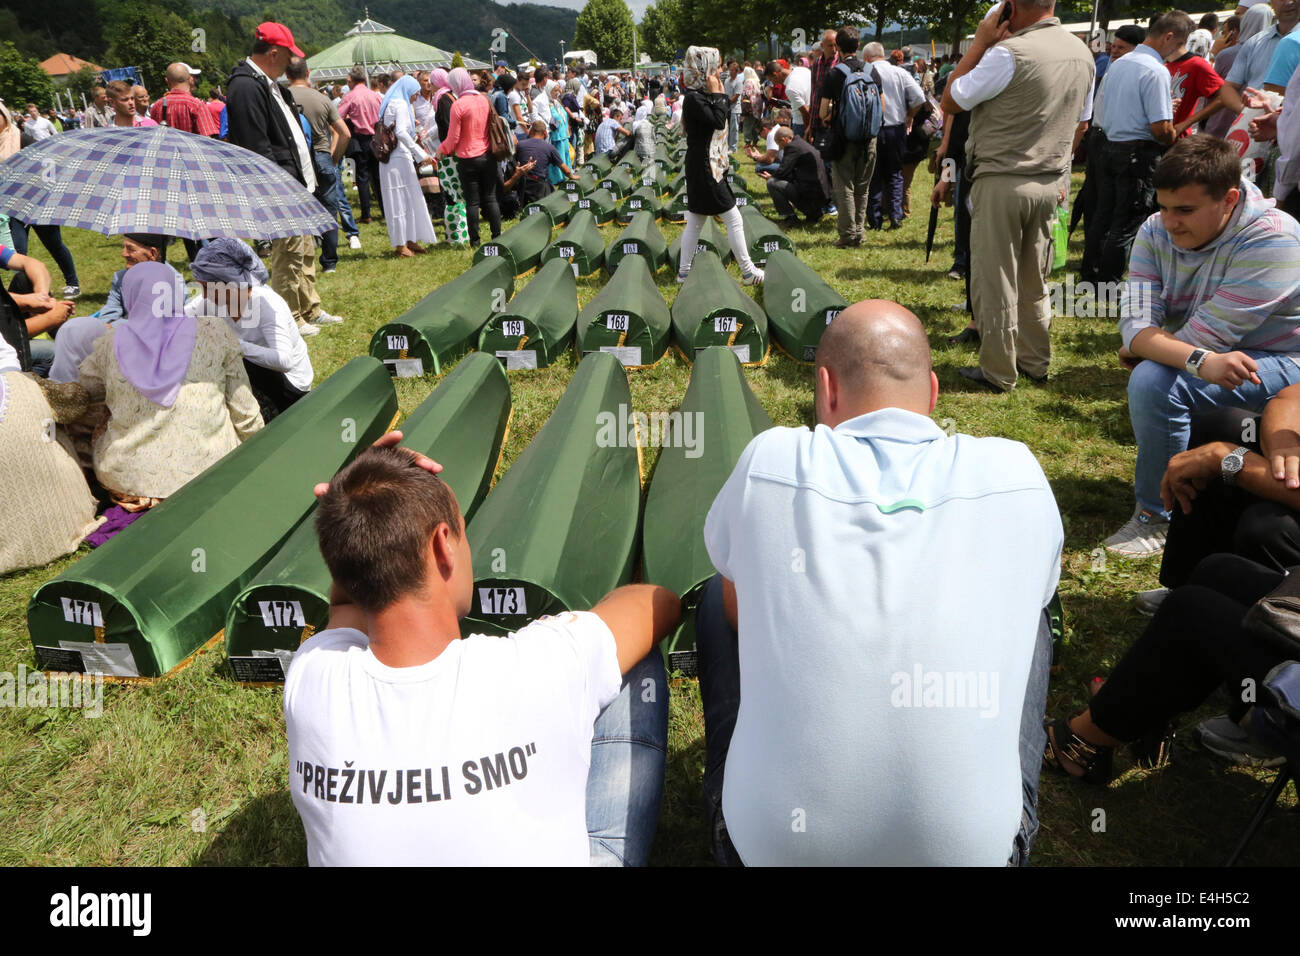 (140712) -- SREBRENICA, July 12, 2014 (Xinhua) -- Relatives sitting next to coffins of the victims mourn before a funeral in Potocari, near Srebrenica, Bosnia and Herzegovina, July 11, 2014. The funeral of 175 recently identified victims was held here Friday to commemorate the 19th anniversary of the Srebrenica massacre. Some 7,000 Muslim men and boys were massacred in and near Srebrenica by Bosnian Serb forces in July 1995, the worst massacre in Europe since the end of World War II. (Xinhua/Haris Memija) (zjl) Stock Photo